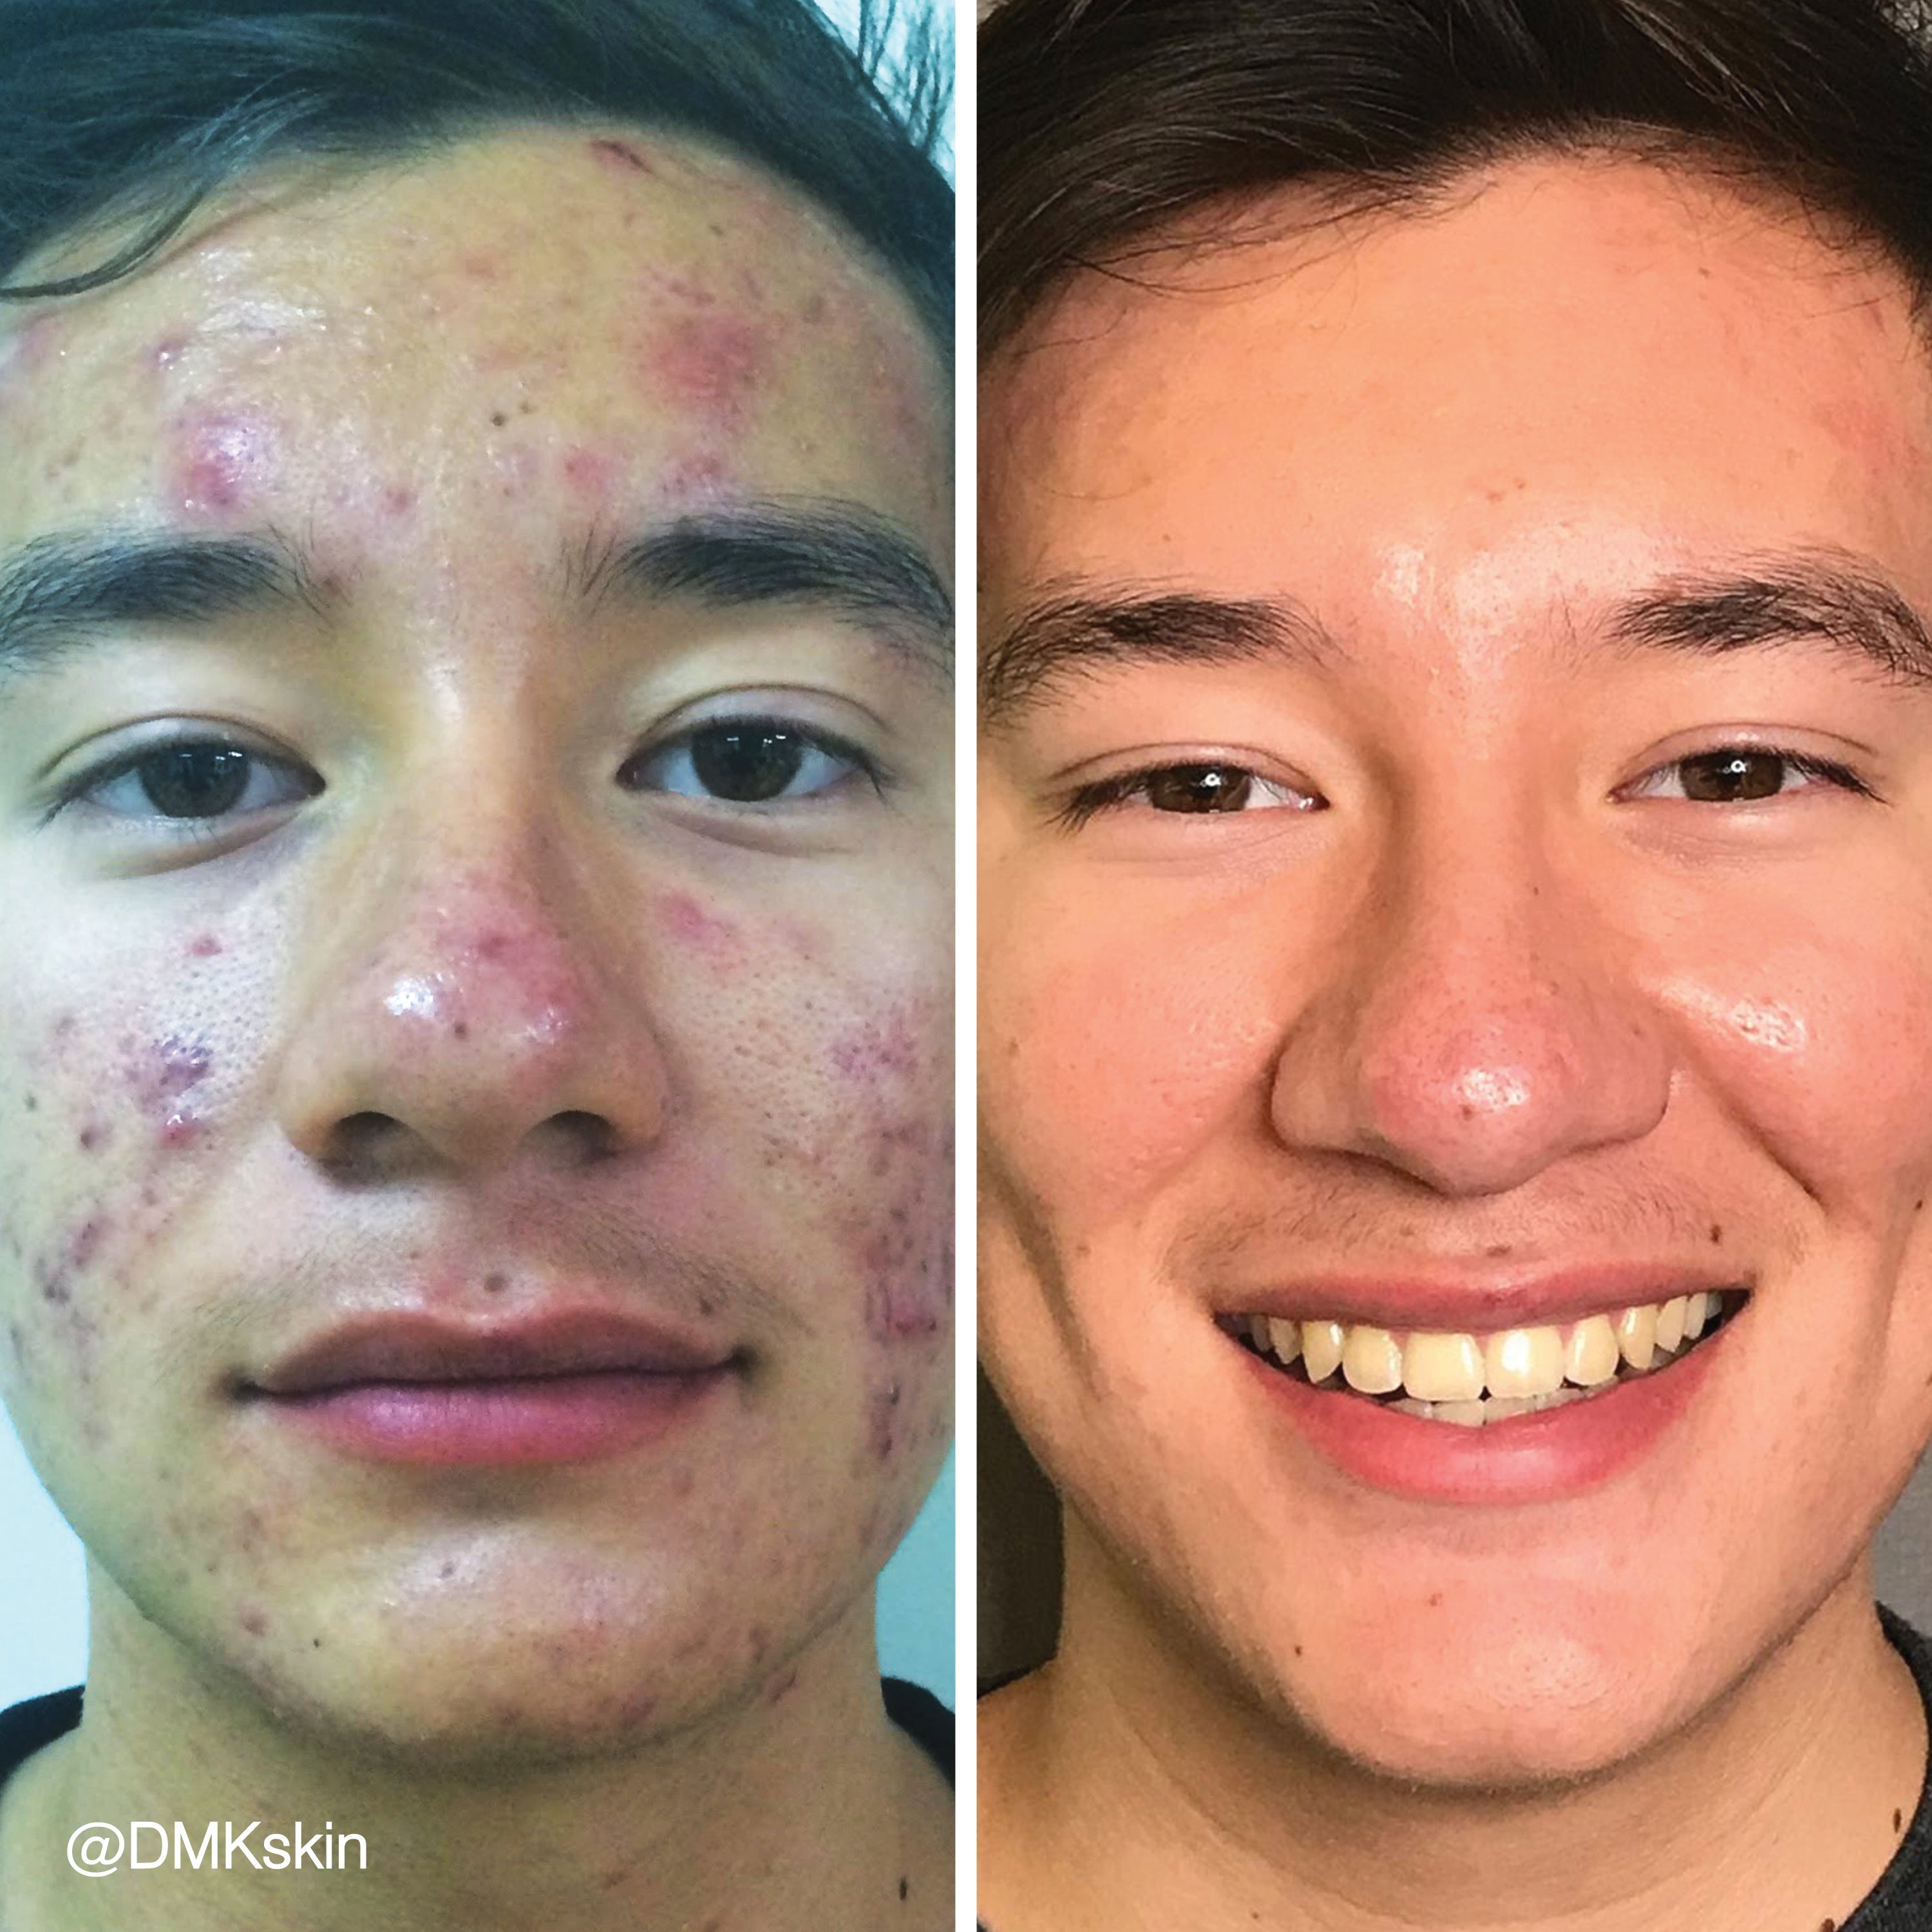 Uncover the “Why” of Your Acne, and You’ll Soon Uncover Healthier, More Beautiful Skin